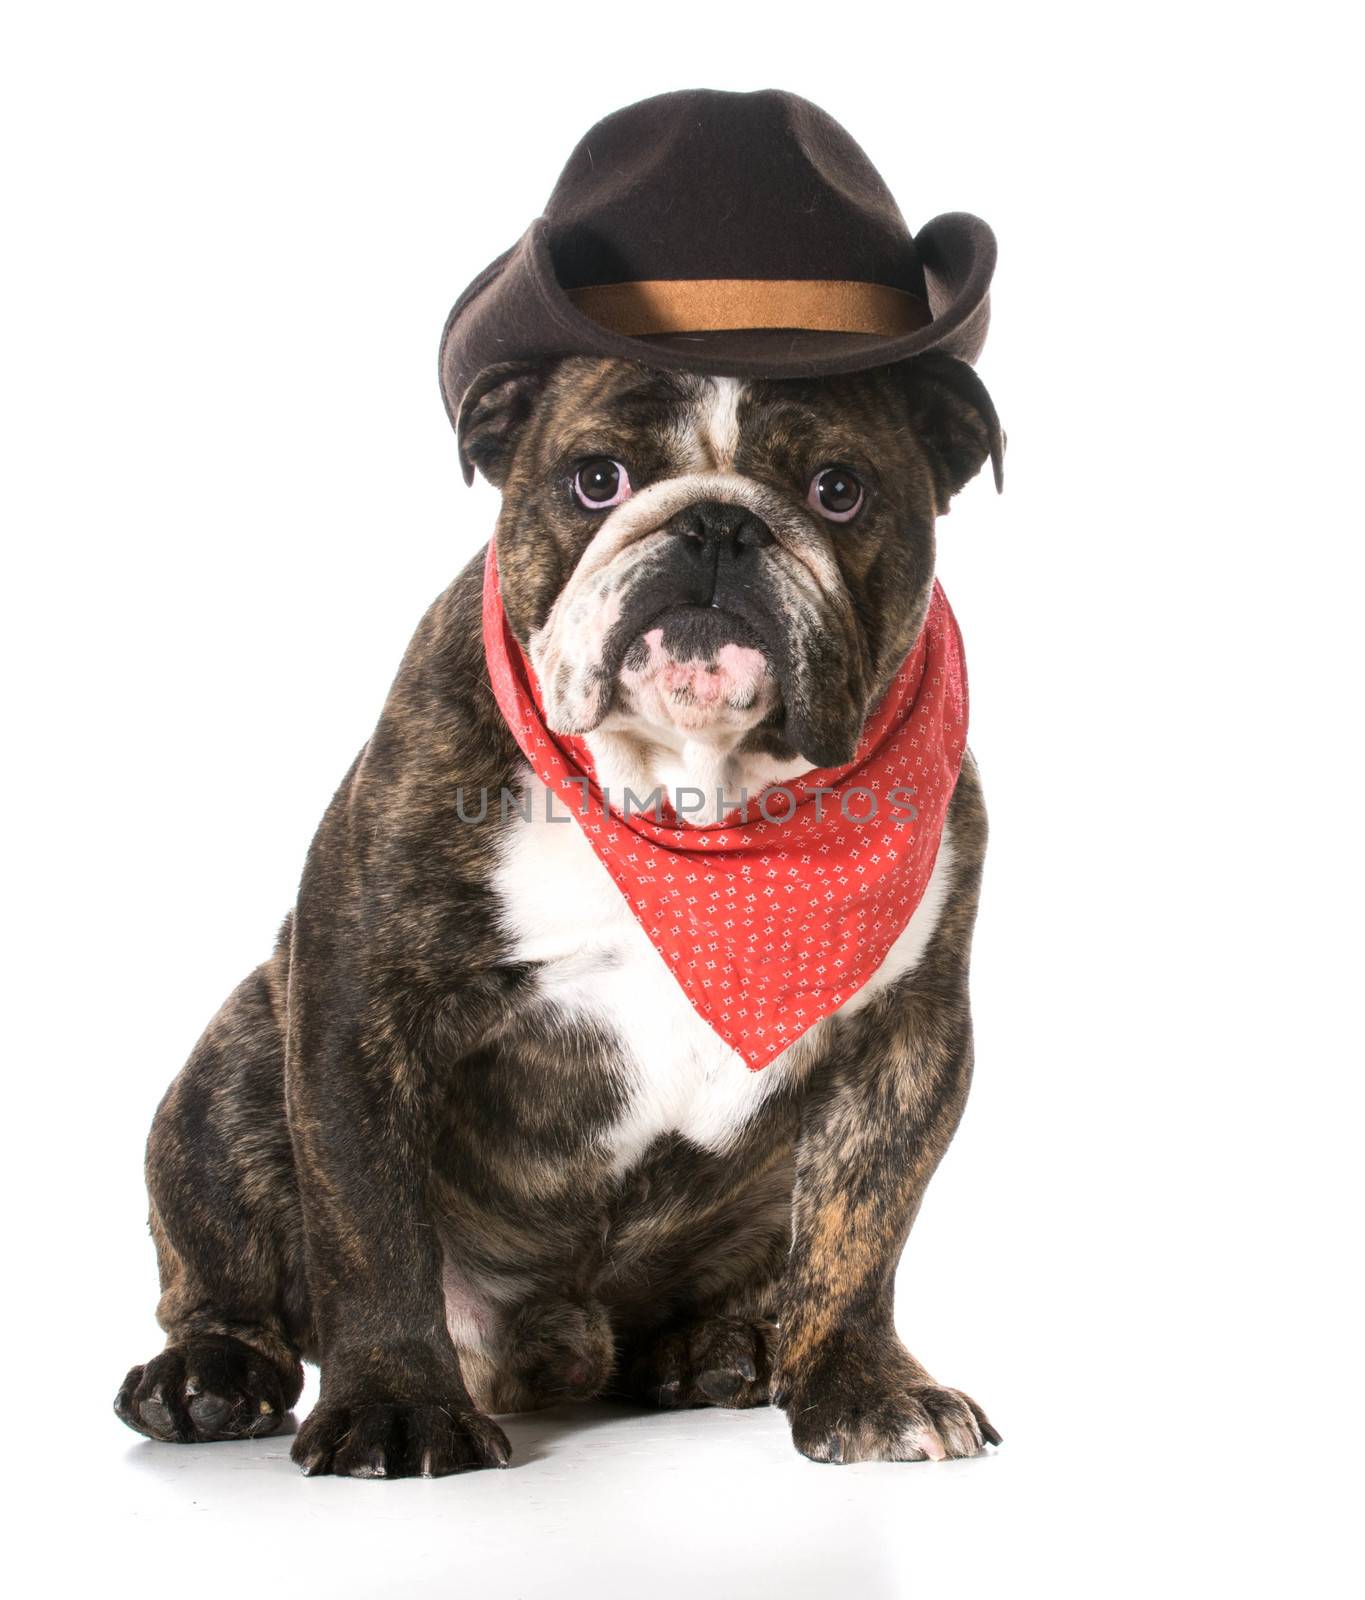 country dog - english bulldog wearing red bandanna and cowboy hat on white background